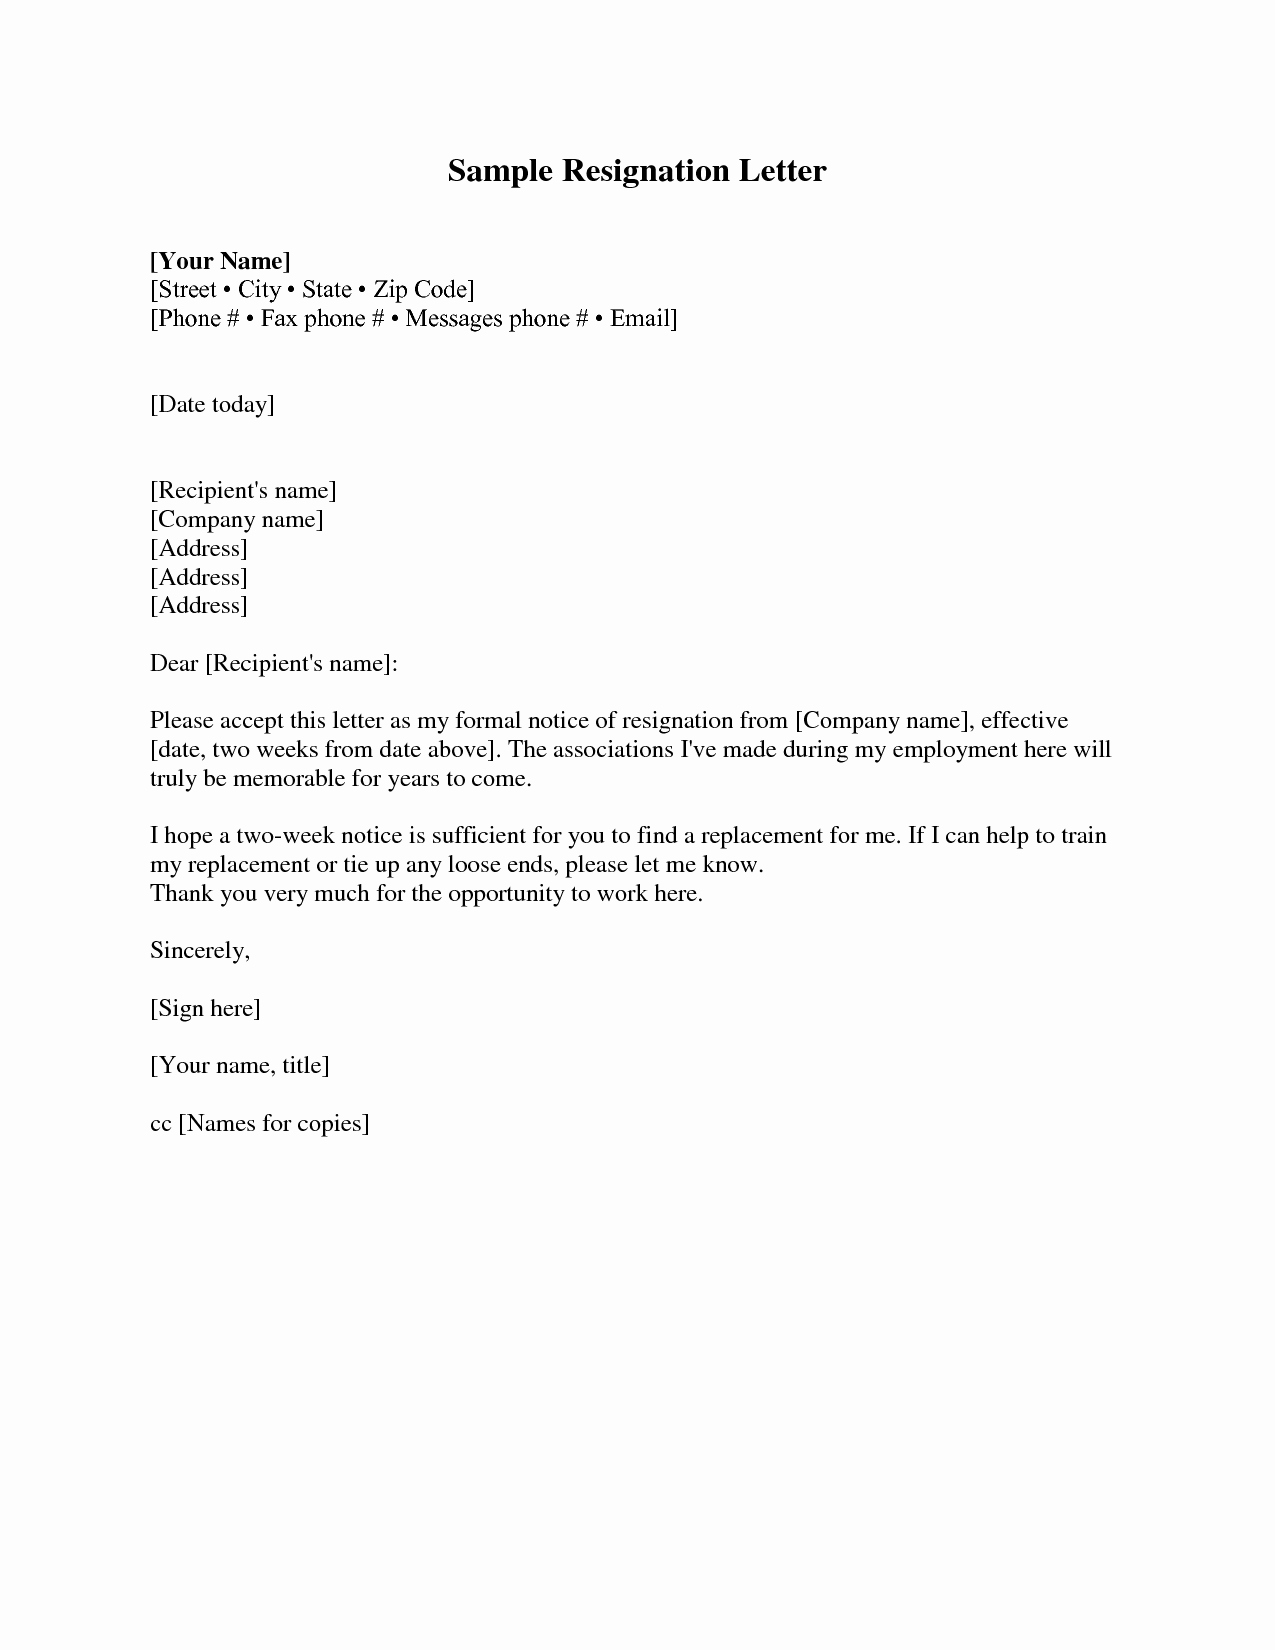 Two Weeks Notice Letter Sample Best Of Resignation Letter 2 Weeks Notice Resignation Letter